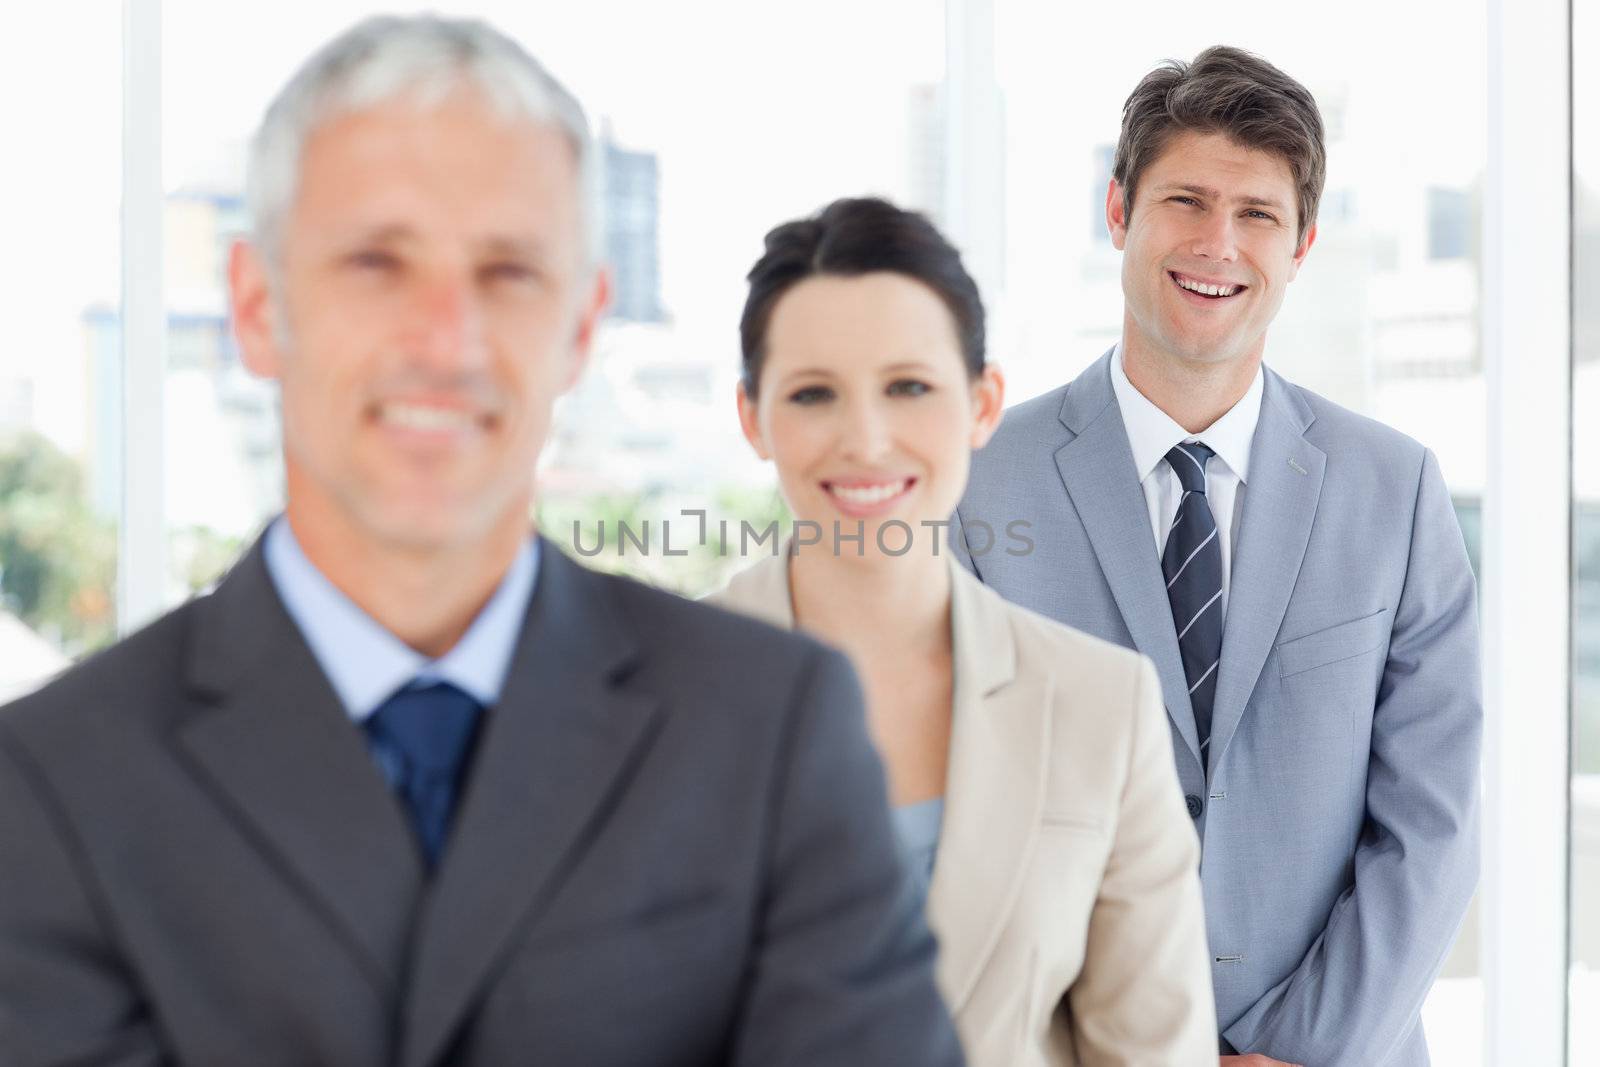 Young smiling executive standing behind two business people